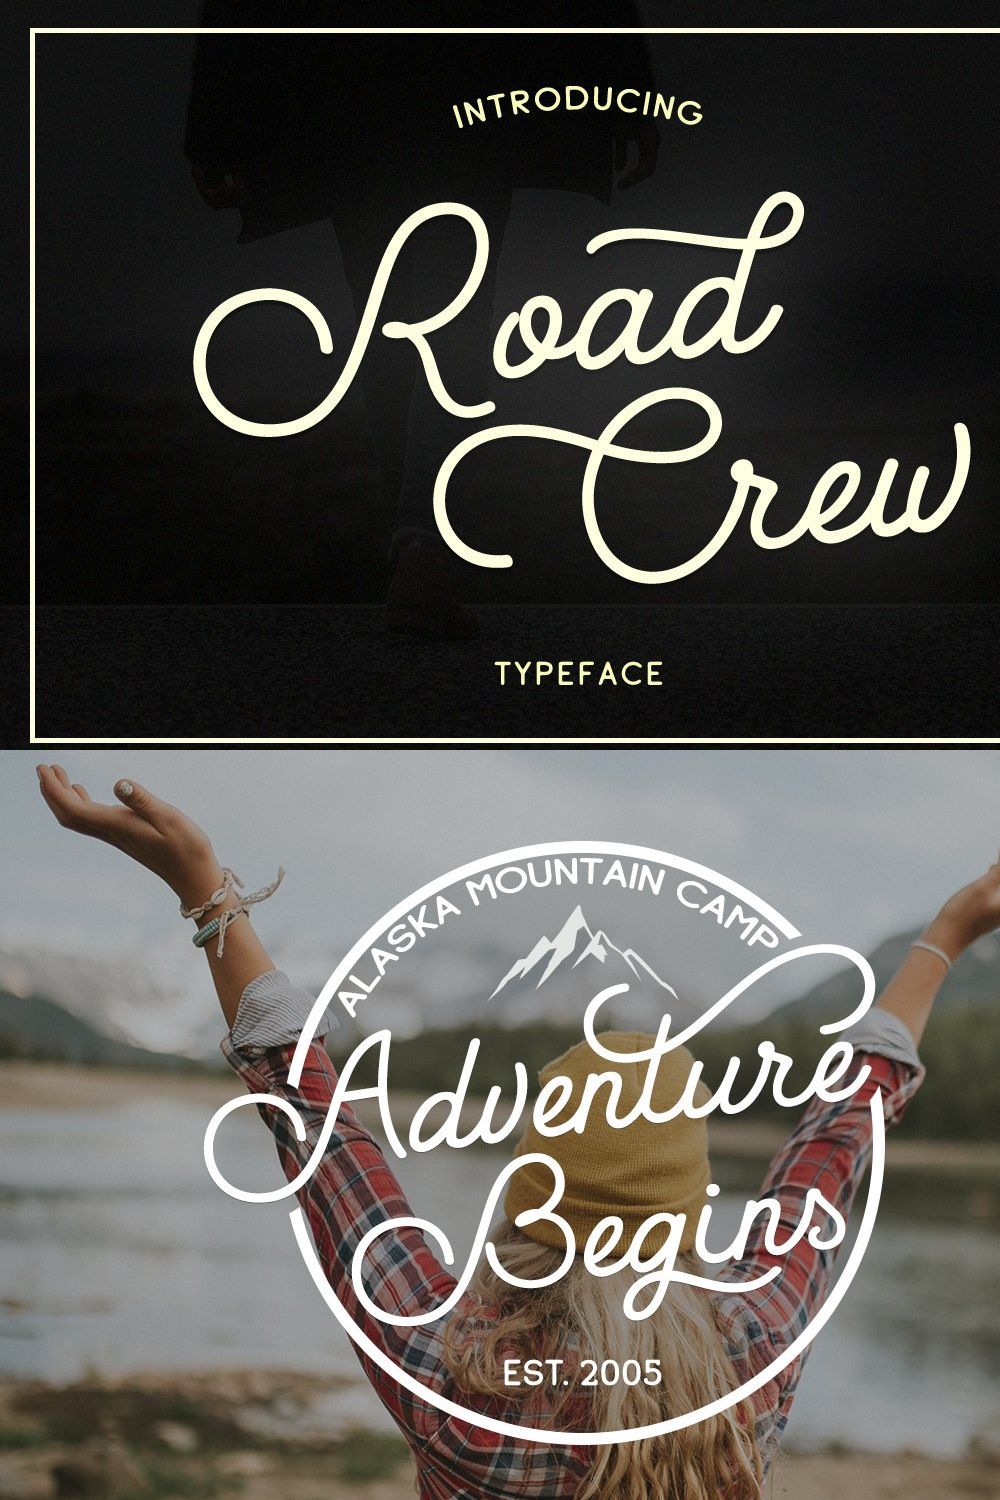 Road Crew pinterest preview image.